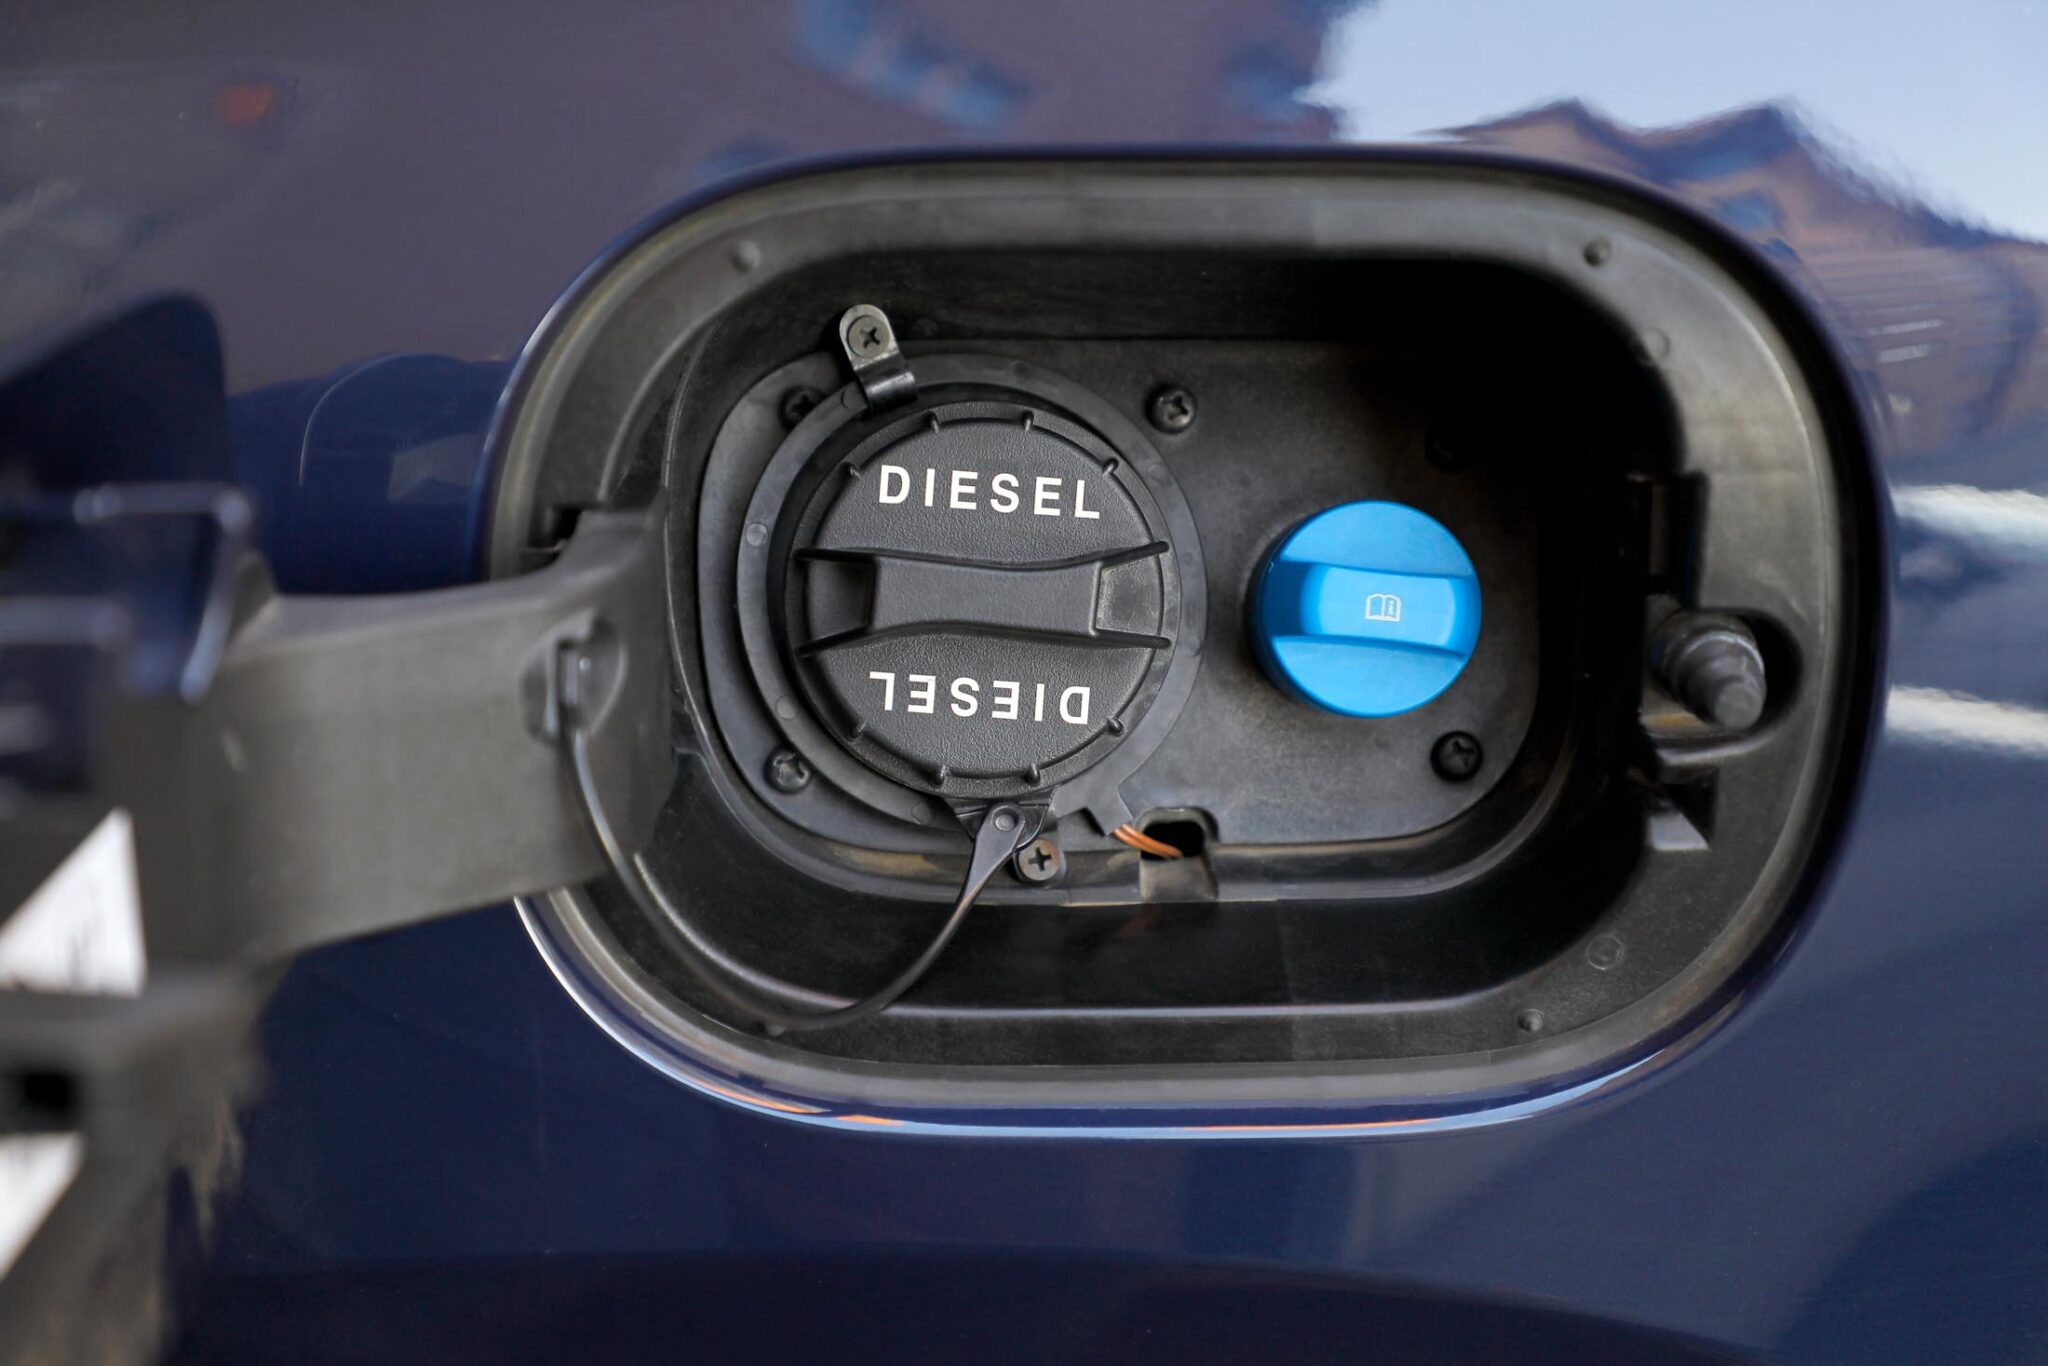 Diesel Exhaust Fluid Market Is Estimated To Witness High Growth Owing To Rise in Environmental Regulations & Growing Adoption of SCR Technology